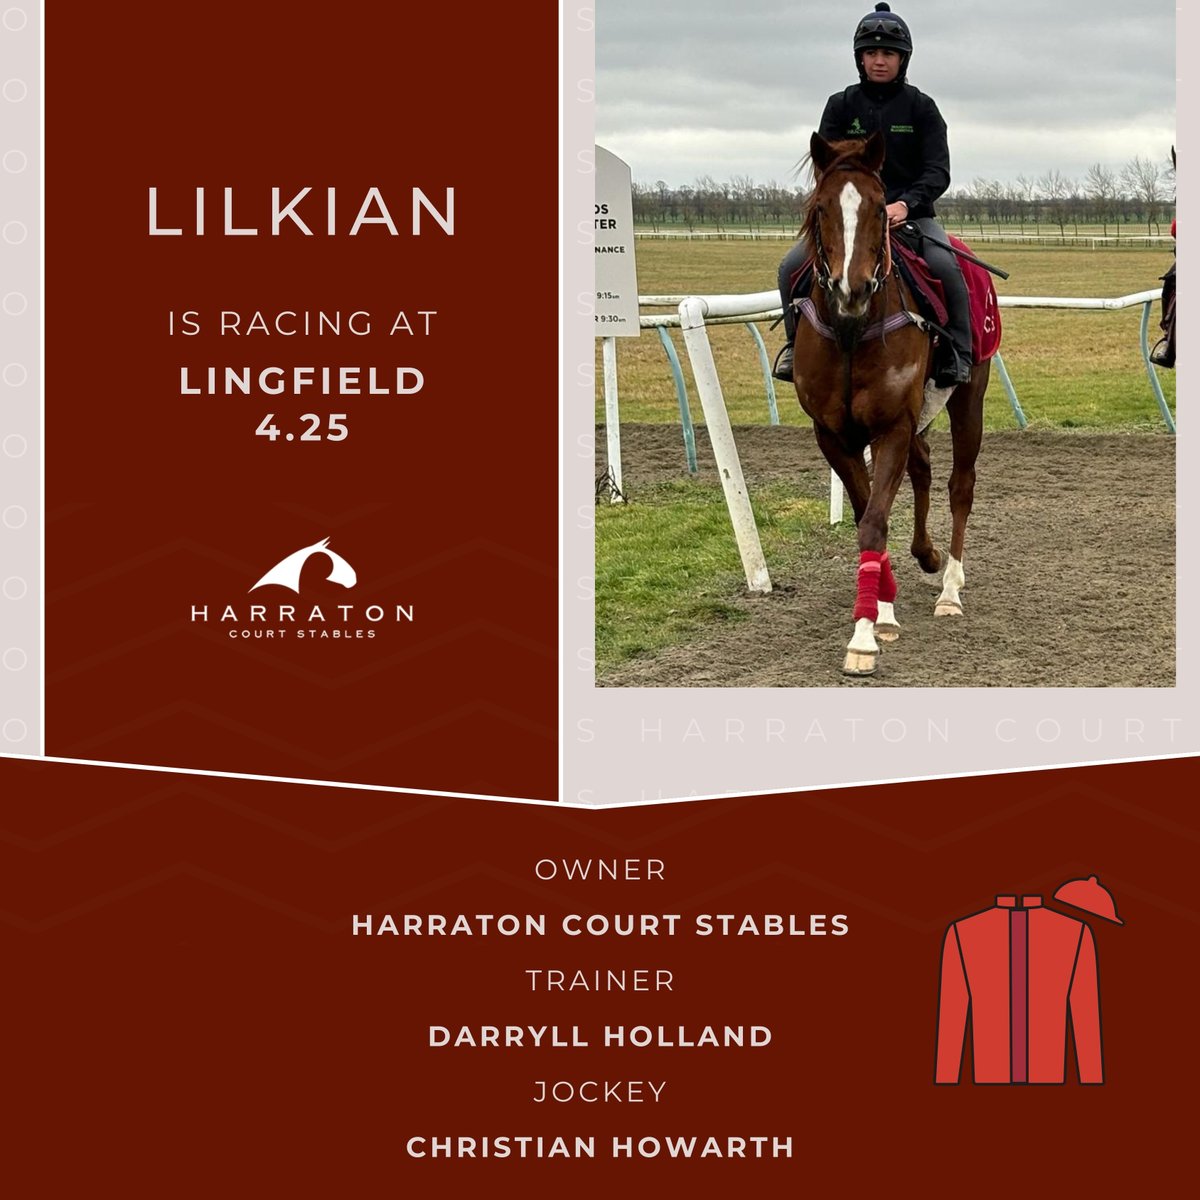 🏇Suanni is racing at Wolverhampton 2.05, jockey @_JasonWatson 🏇Lilkian is racing at Lingfield 4.25, jockey Christian Howarth 💫Good luck to trainer #DarryllHolland and all connections!🍀 #HarratonCourtStables